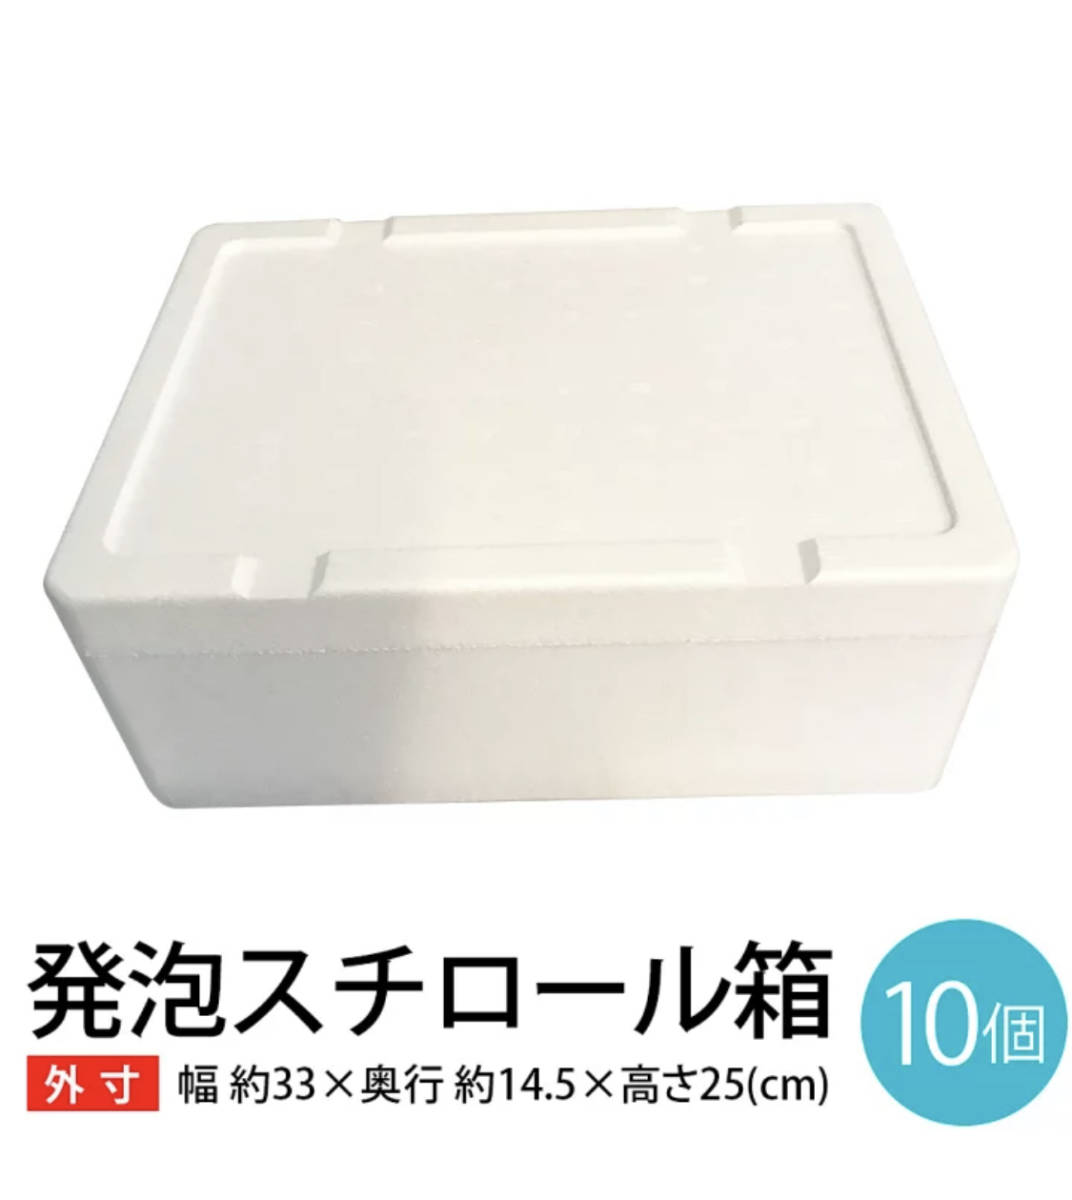 b styrene foam 10 box [ external dimensions width approximately 33× depth approximately 14.5× height approximately 25cm] takkyubin (home delivery service) courier service 80 size BBQ SDGs energy conservation eko . electro- fishing packing material 